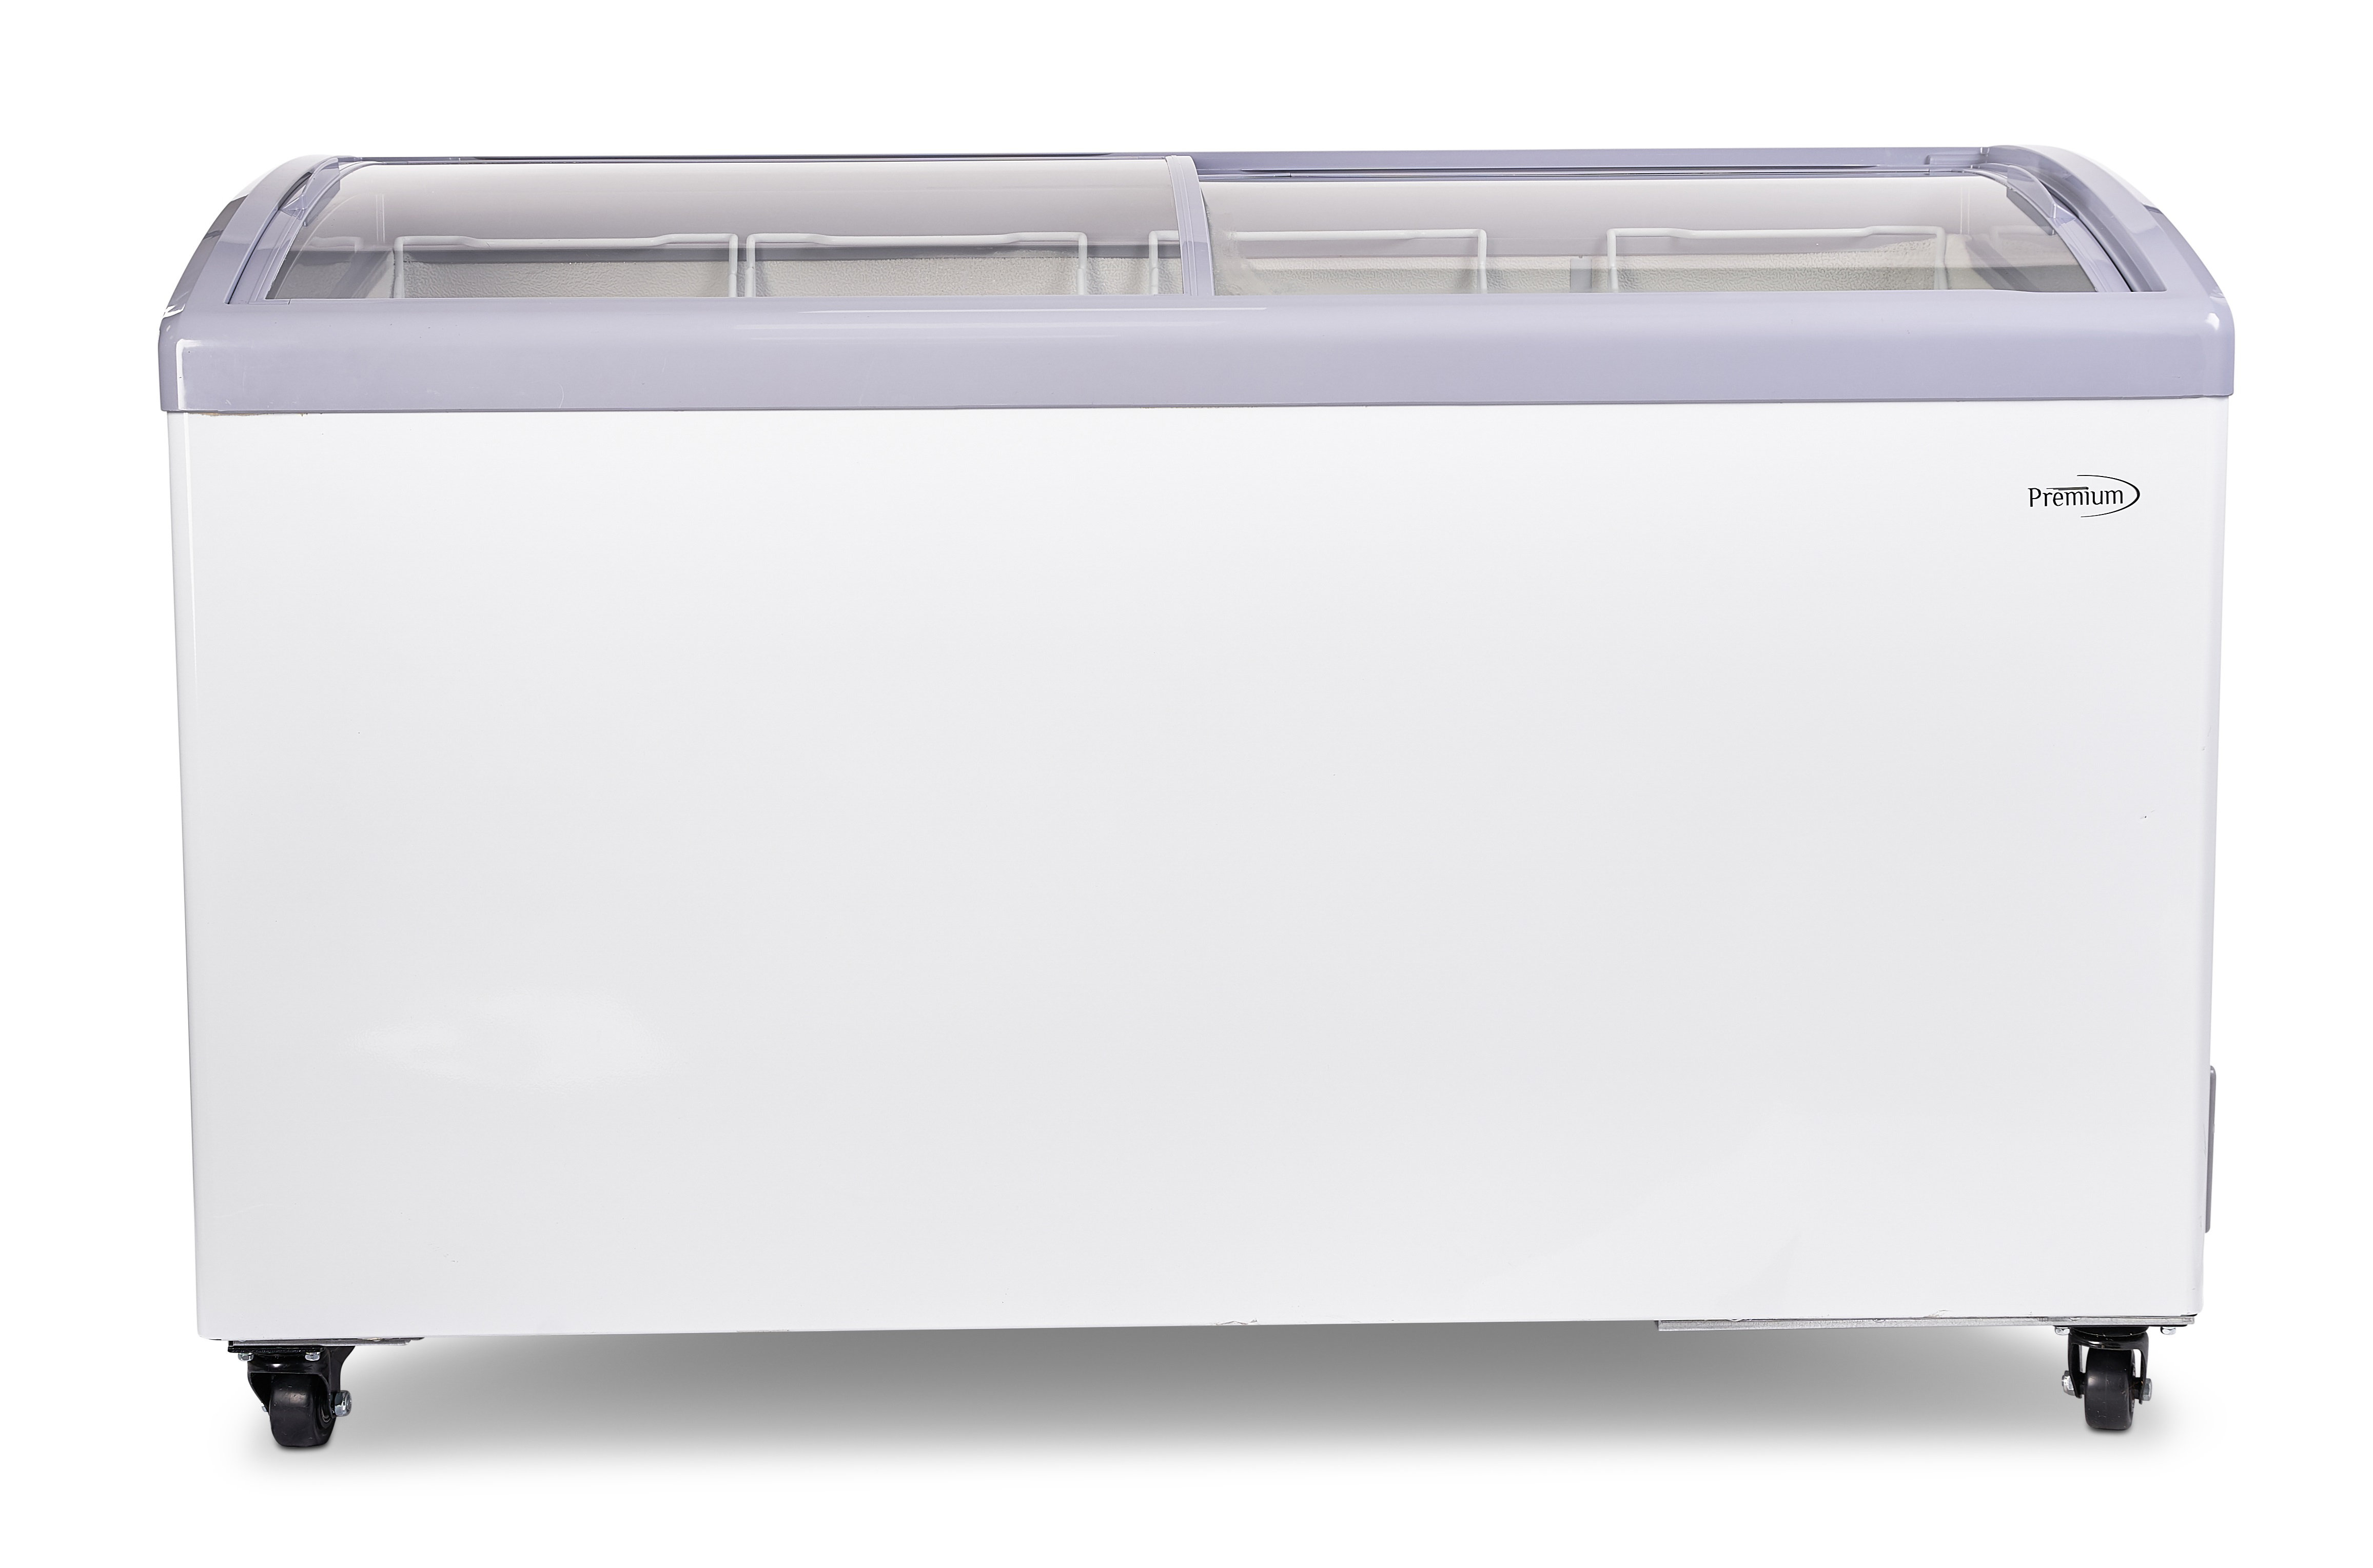 TABU 5 Cubic Feet Chest Freezer with Adjustable Temperature Controls &  Reviews